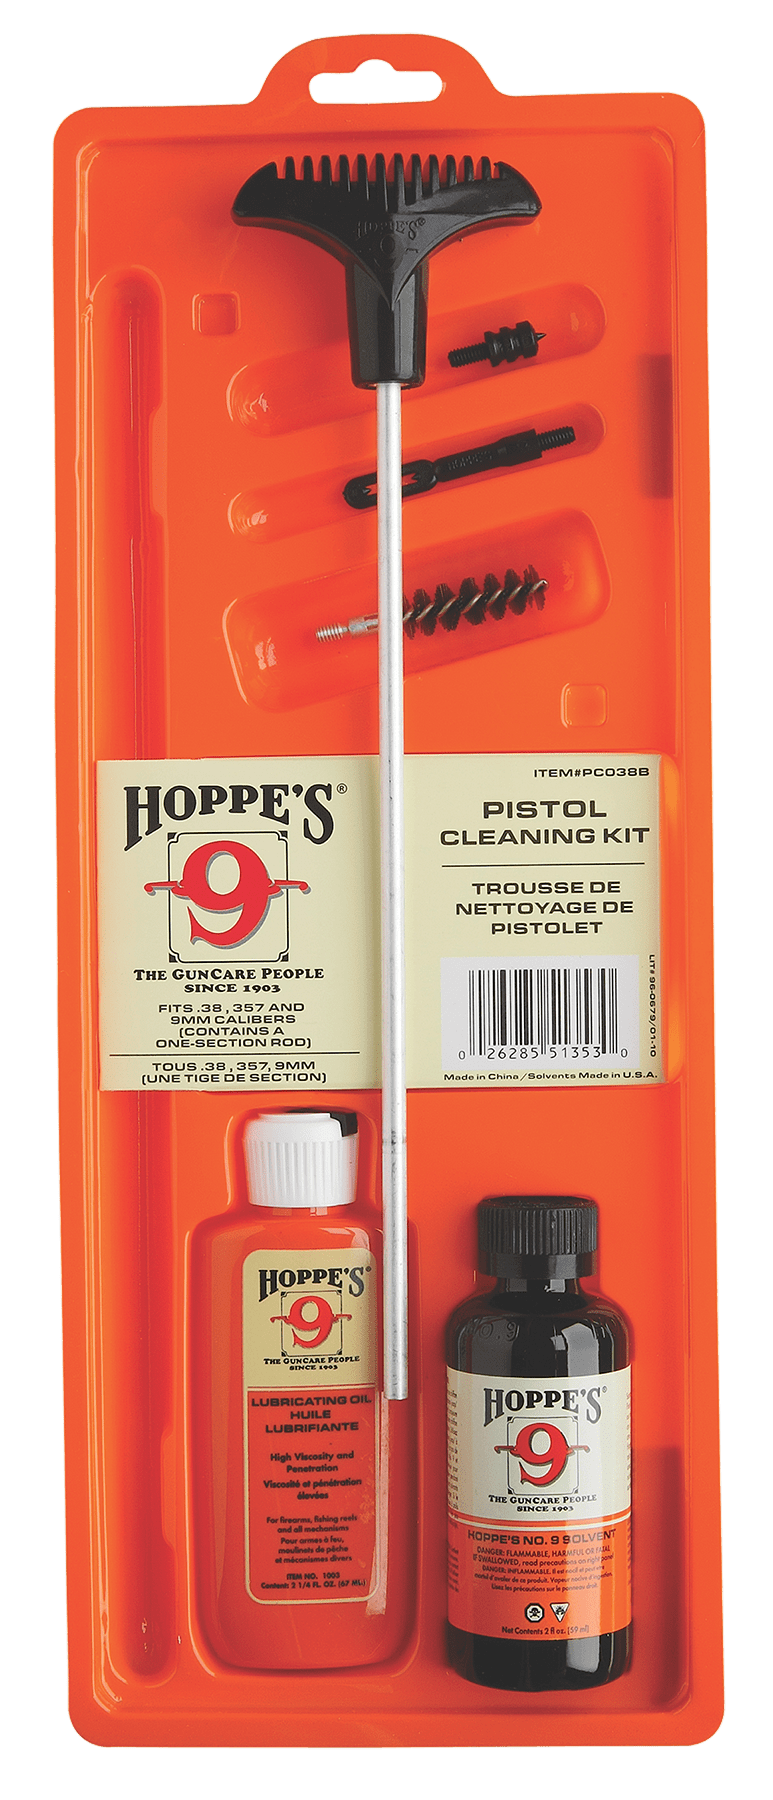 Hoppe's Hoppes 22cal Pstl Clng Kit Clam Cleaning Equipment